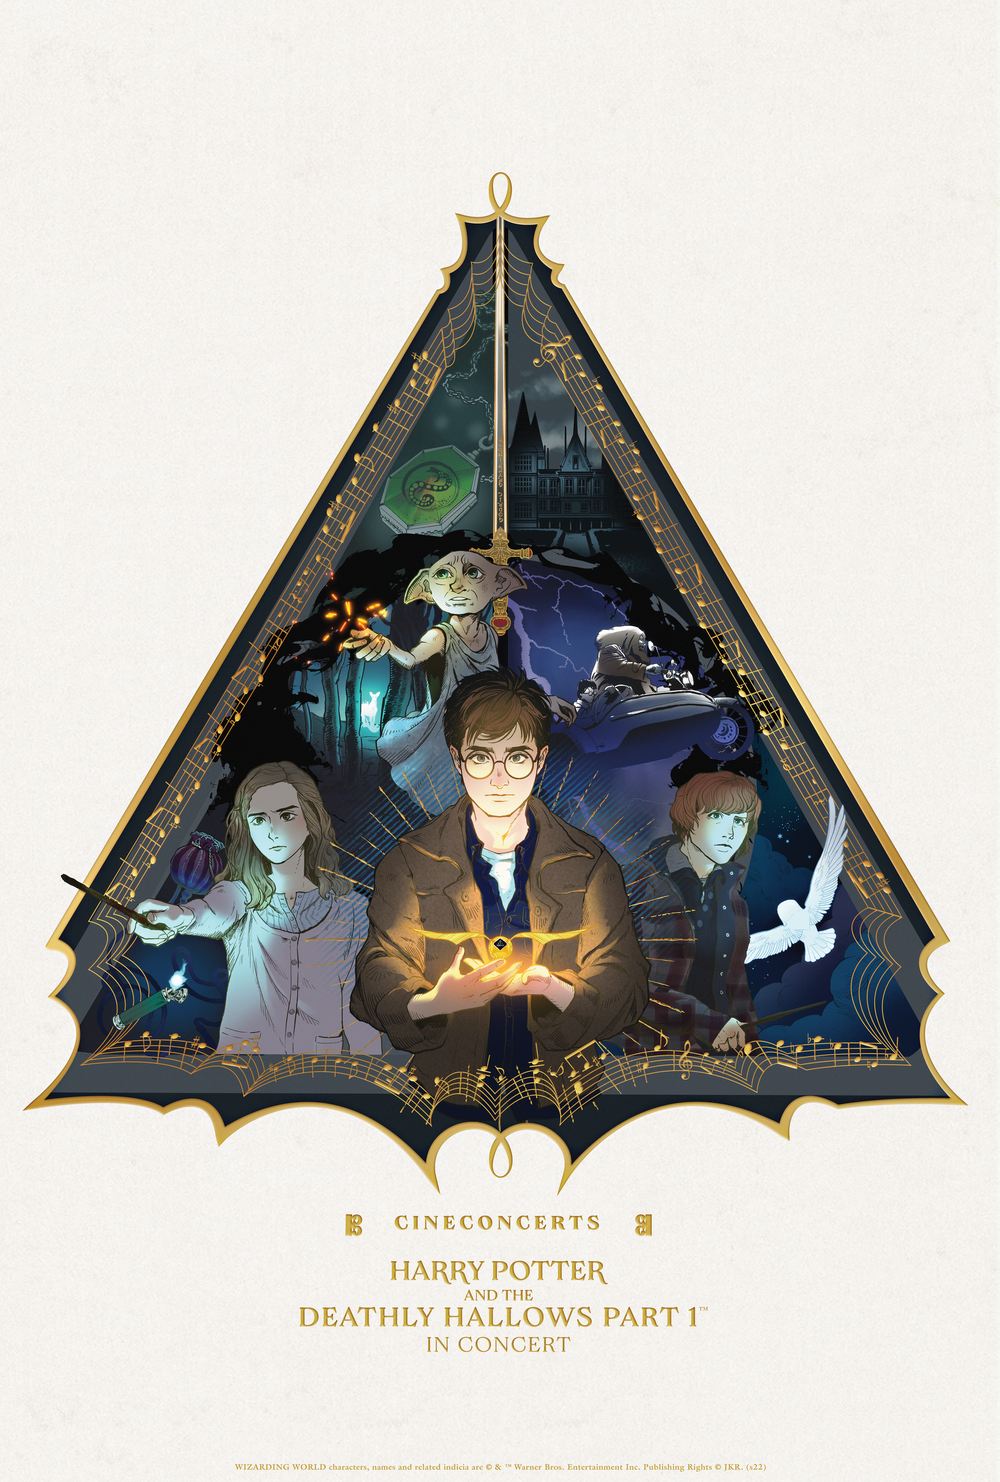 Harry Potter and the Deathly Hallows™ - Part 1 In Concert Poster (24" x 36")